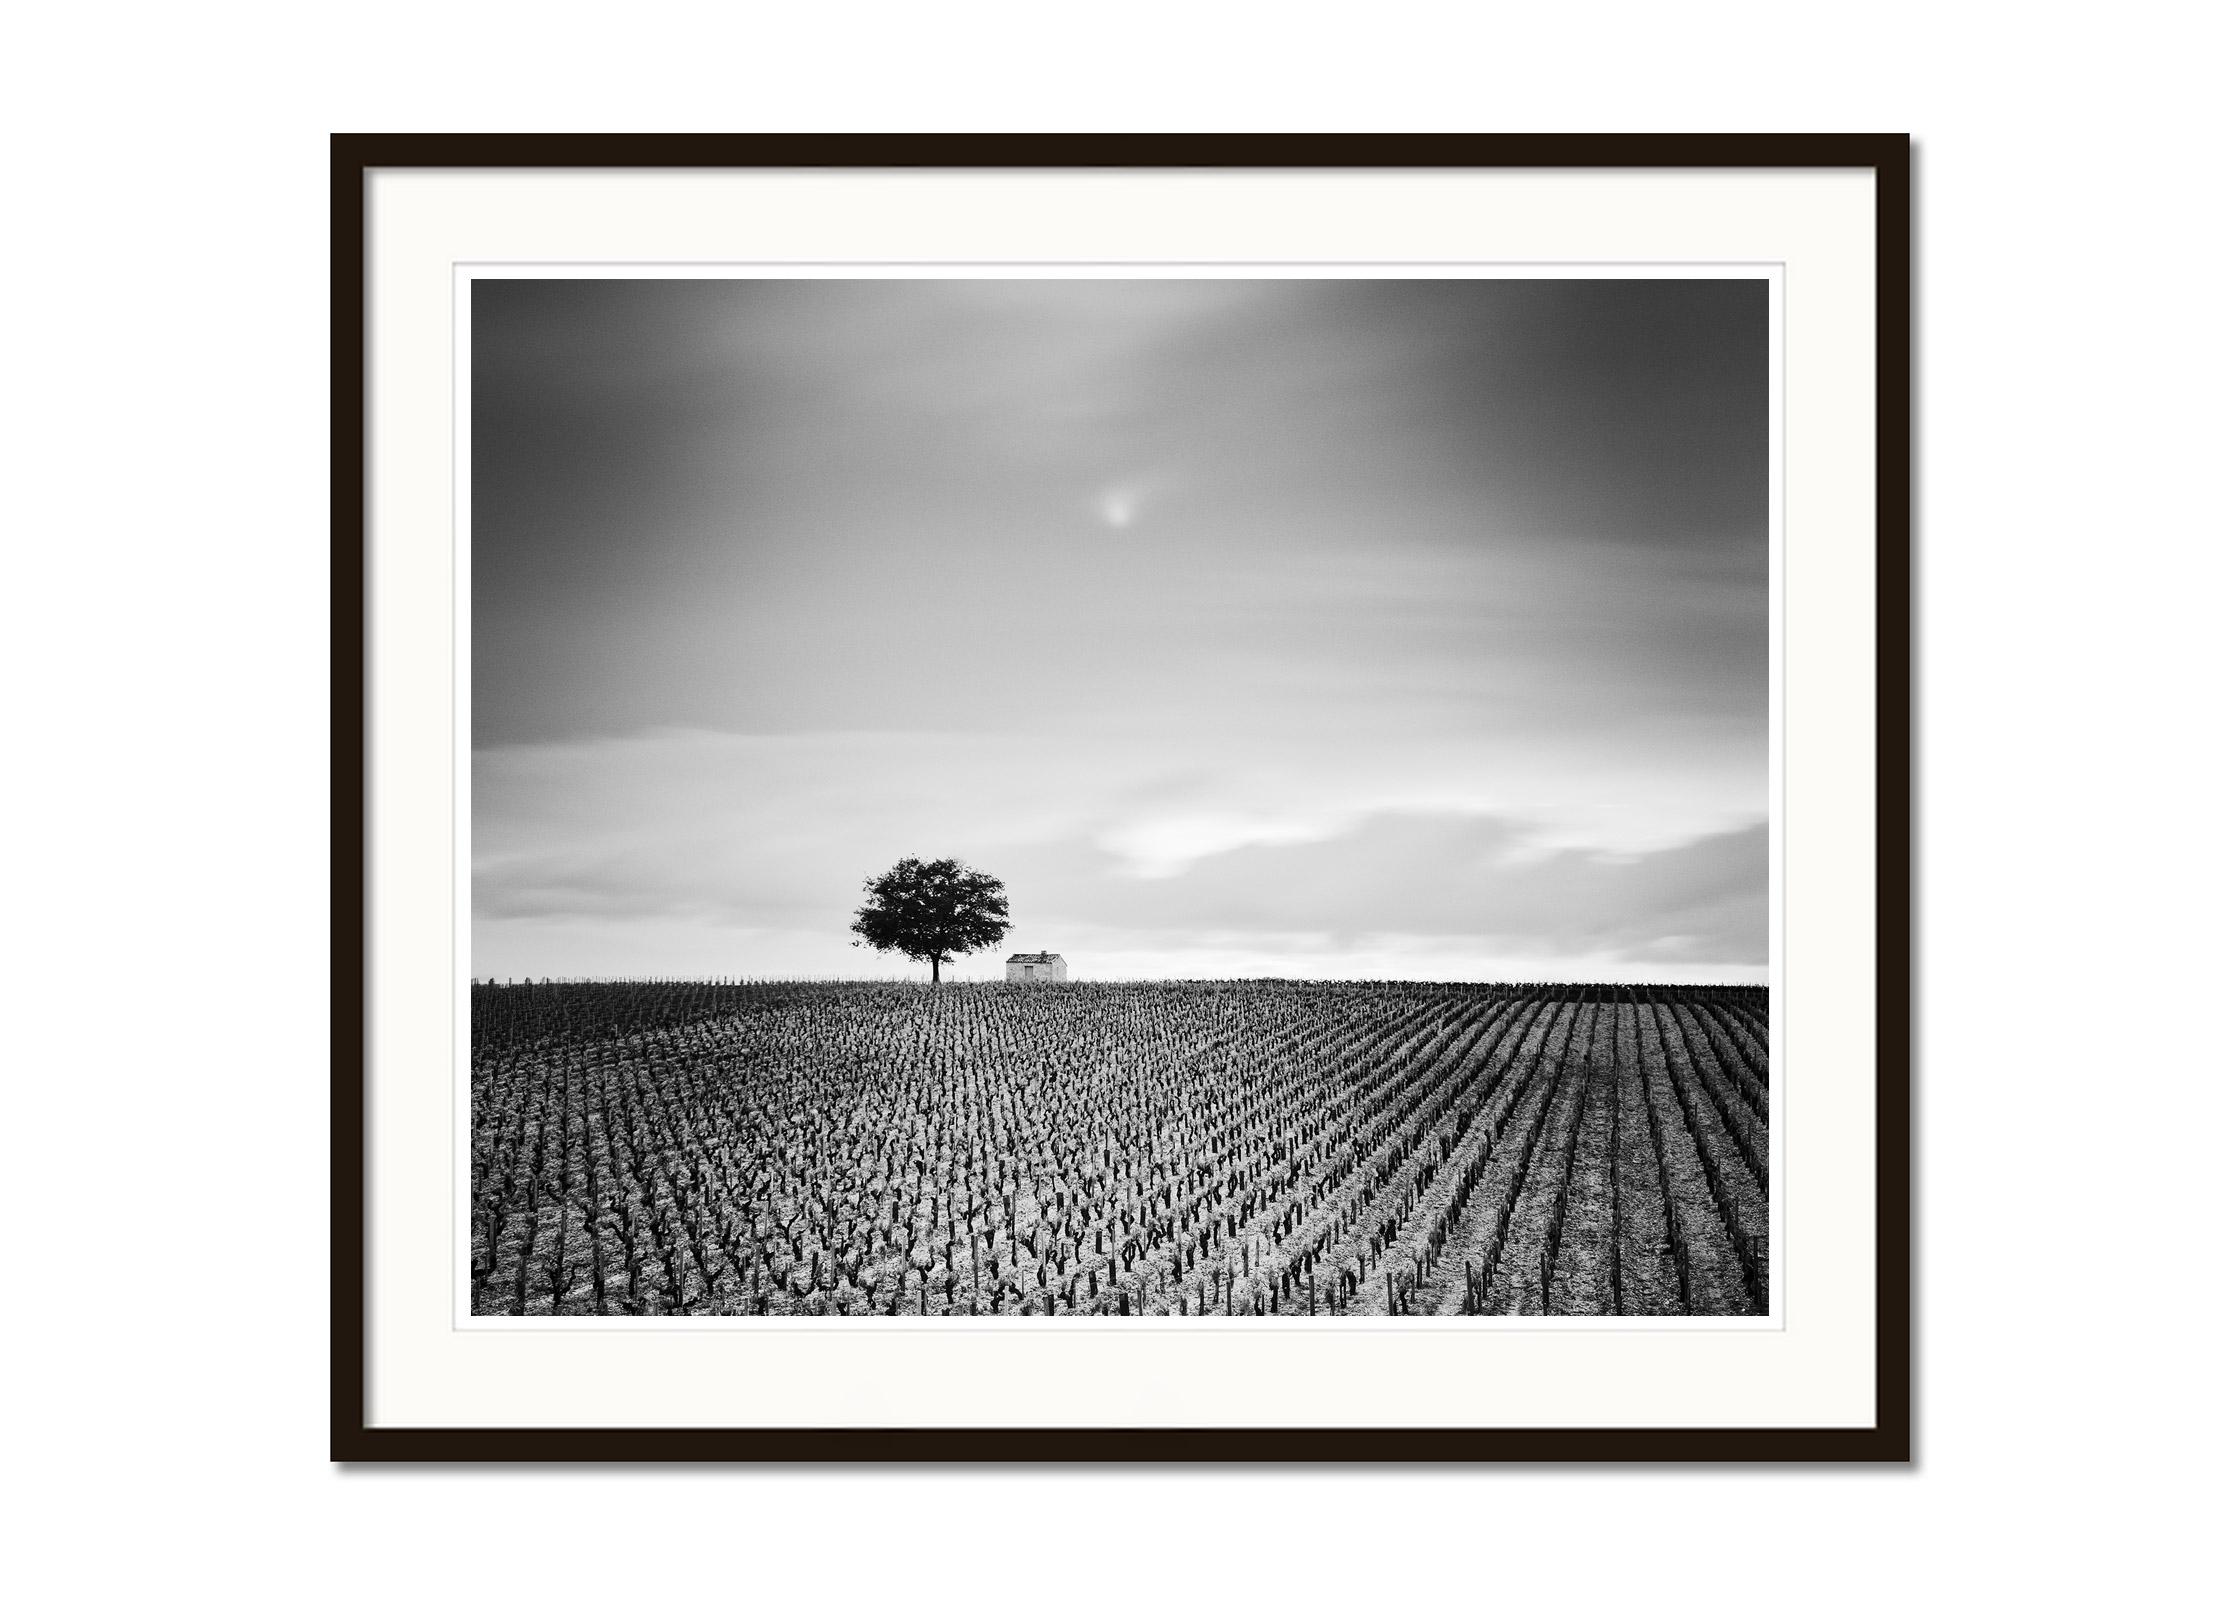 Champagne Paradise, single Tree, Vineyard, France, black & white landscape photo - Gray Black and White Photograph by Gerald Berghammer